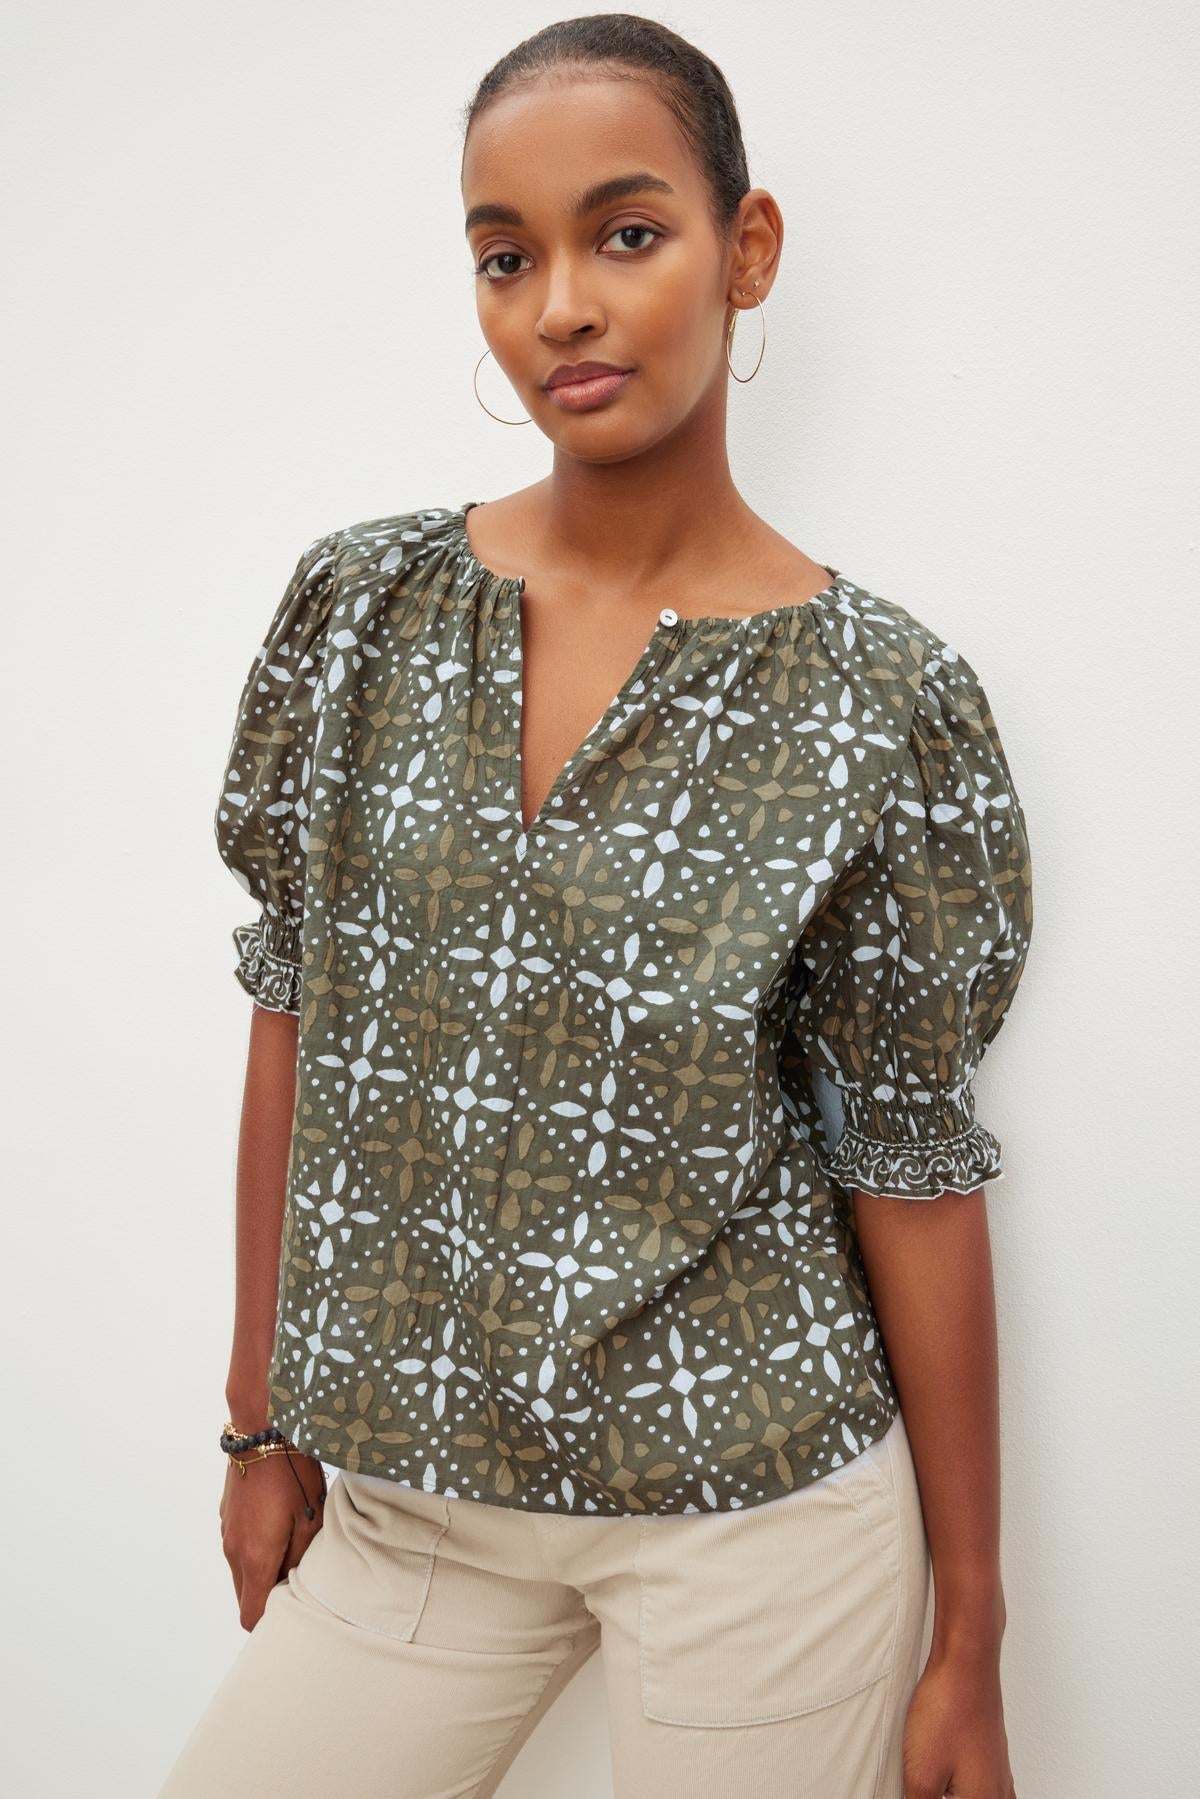 The model is wearing a Velvet by Graham & Spencer ALEX PRINTED BLOUSE.-26799971795137